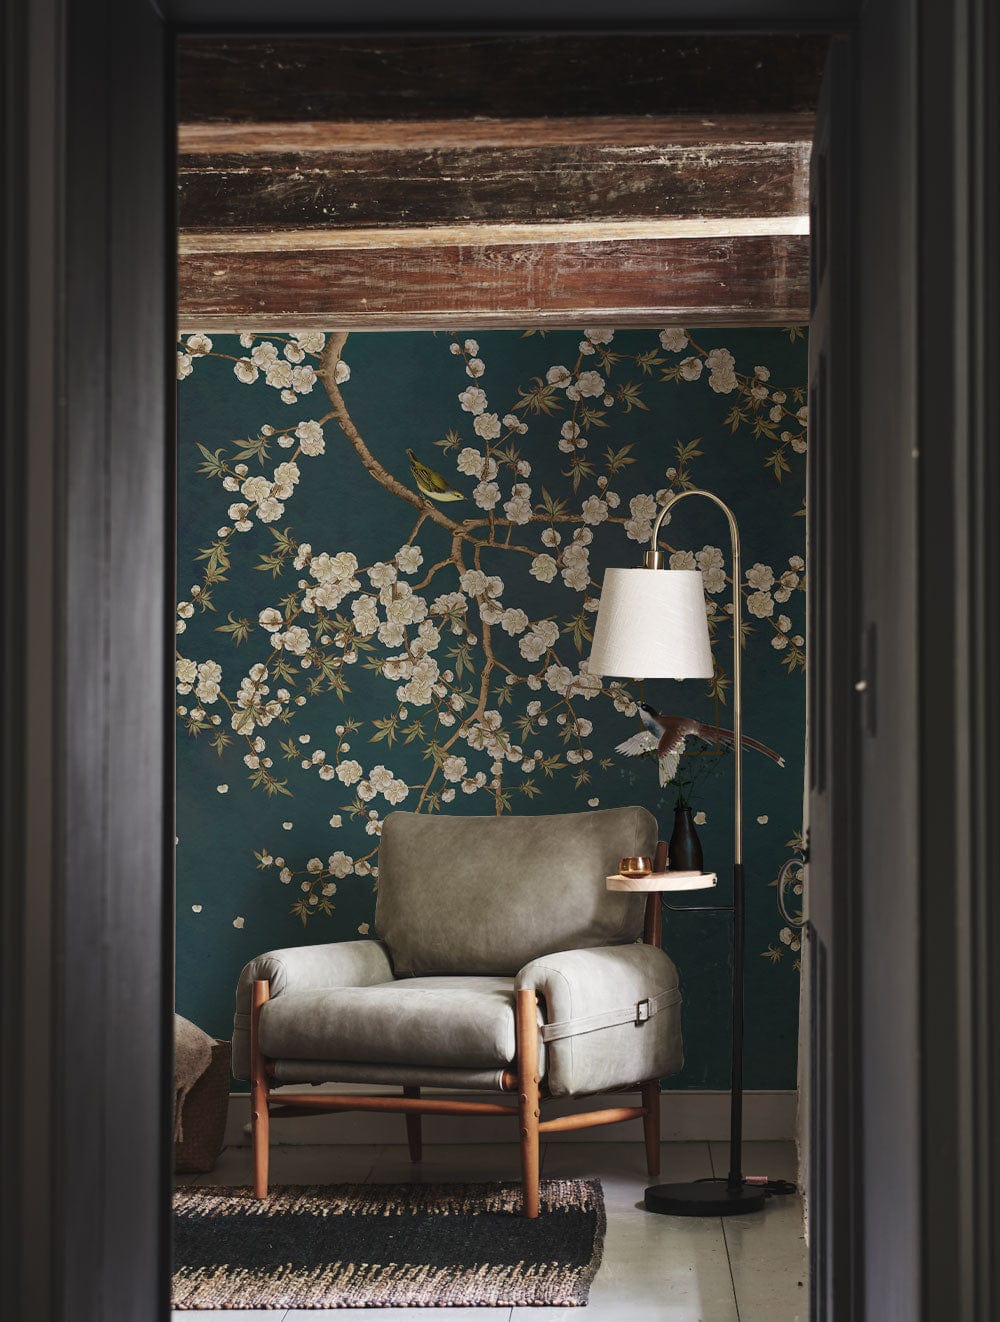 Mural with Flower Vines on Jasper Wallpaper Used for Hallway Decorations